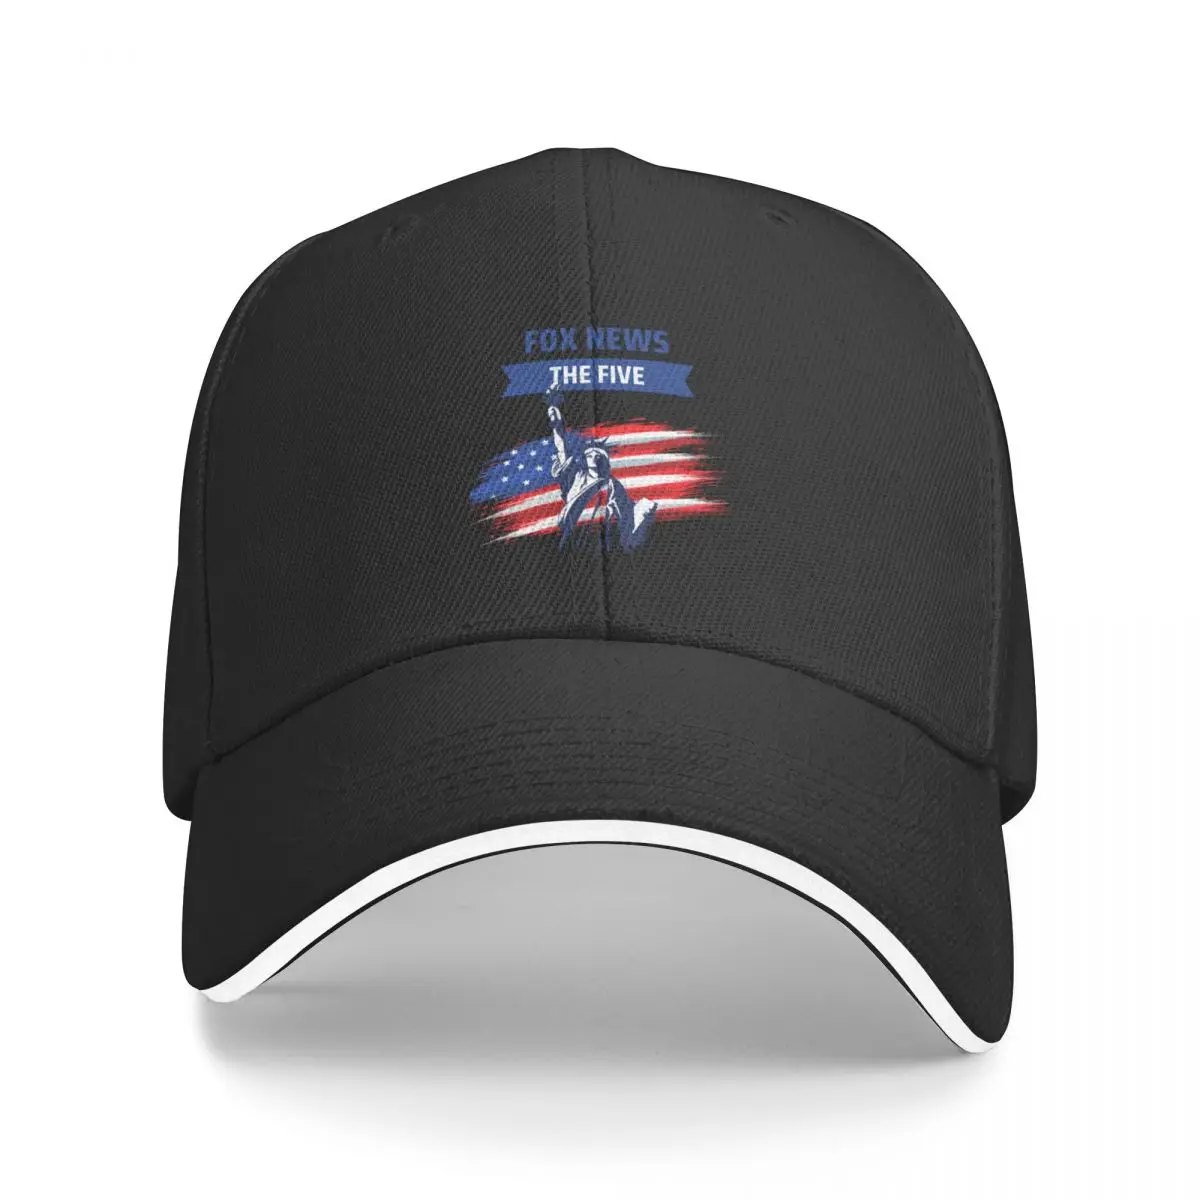 

fox news the five Baseball Cap New In The Hat Big Size Hat Beach Outing Men's Caps Women's